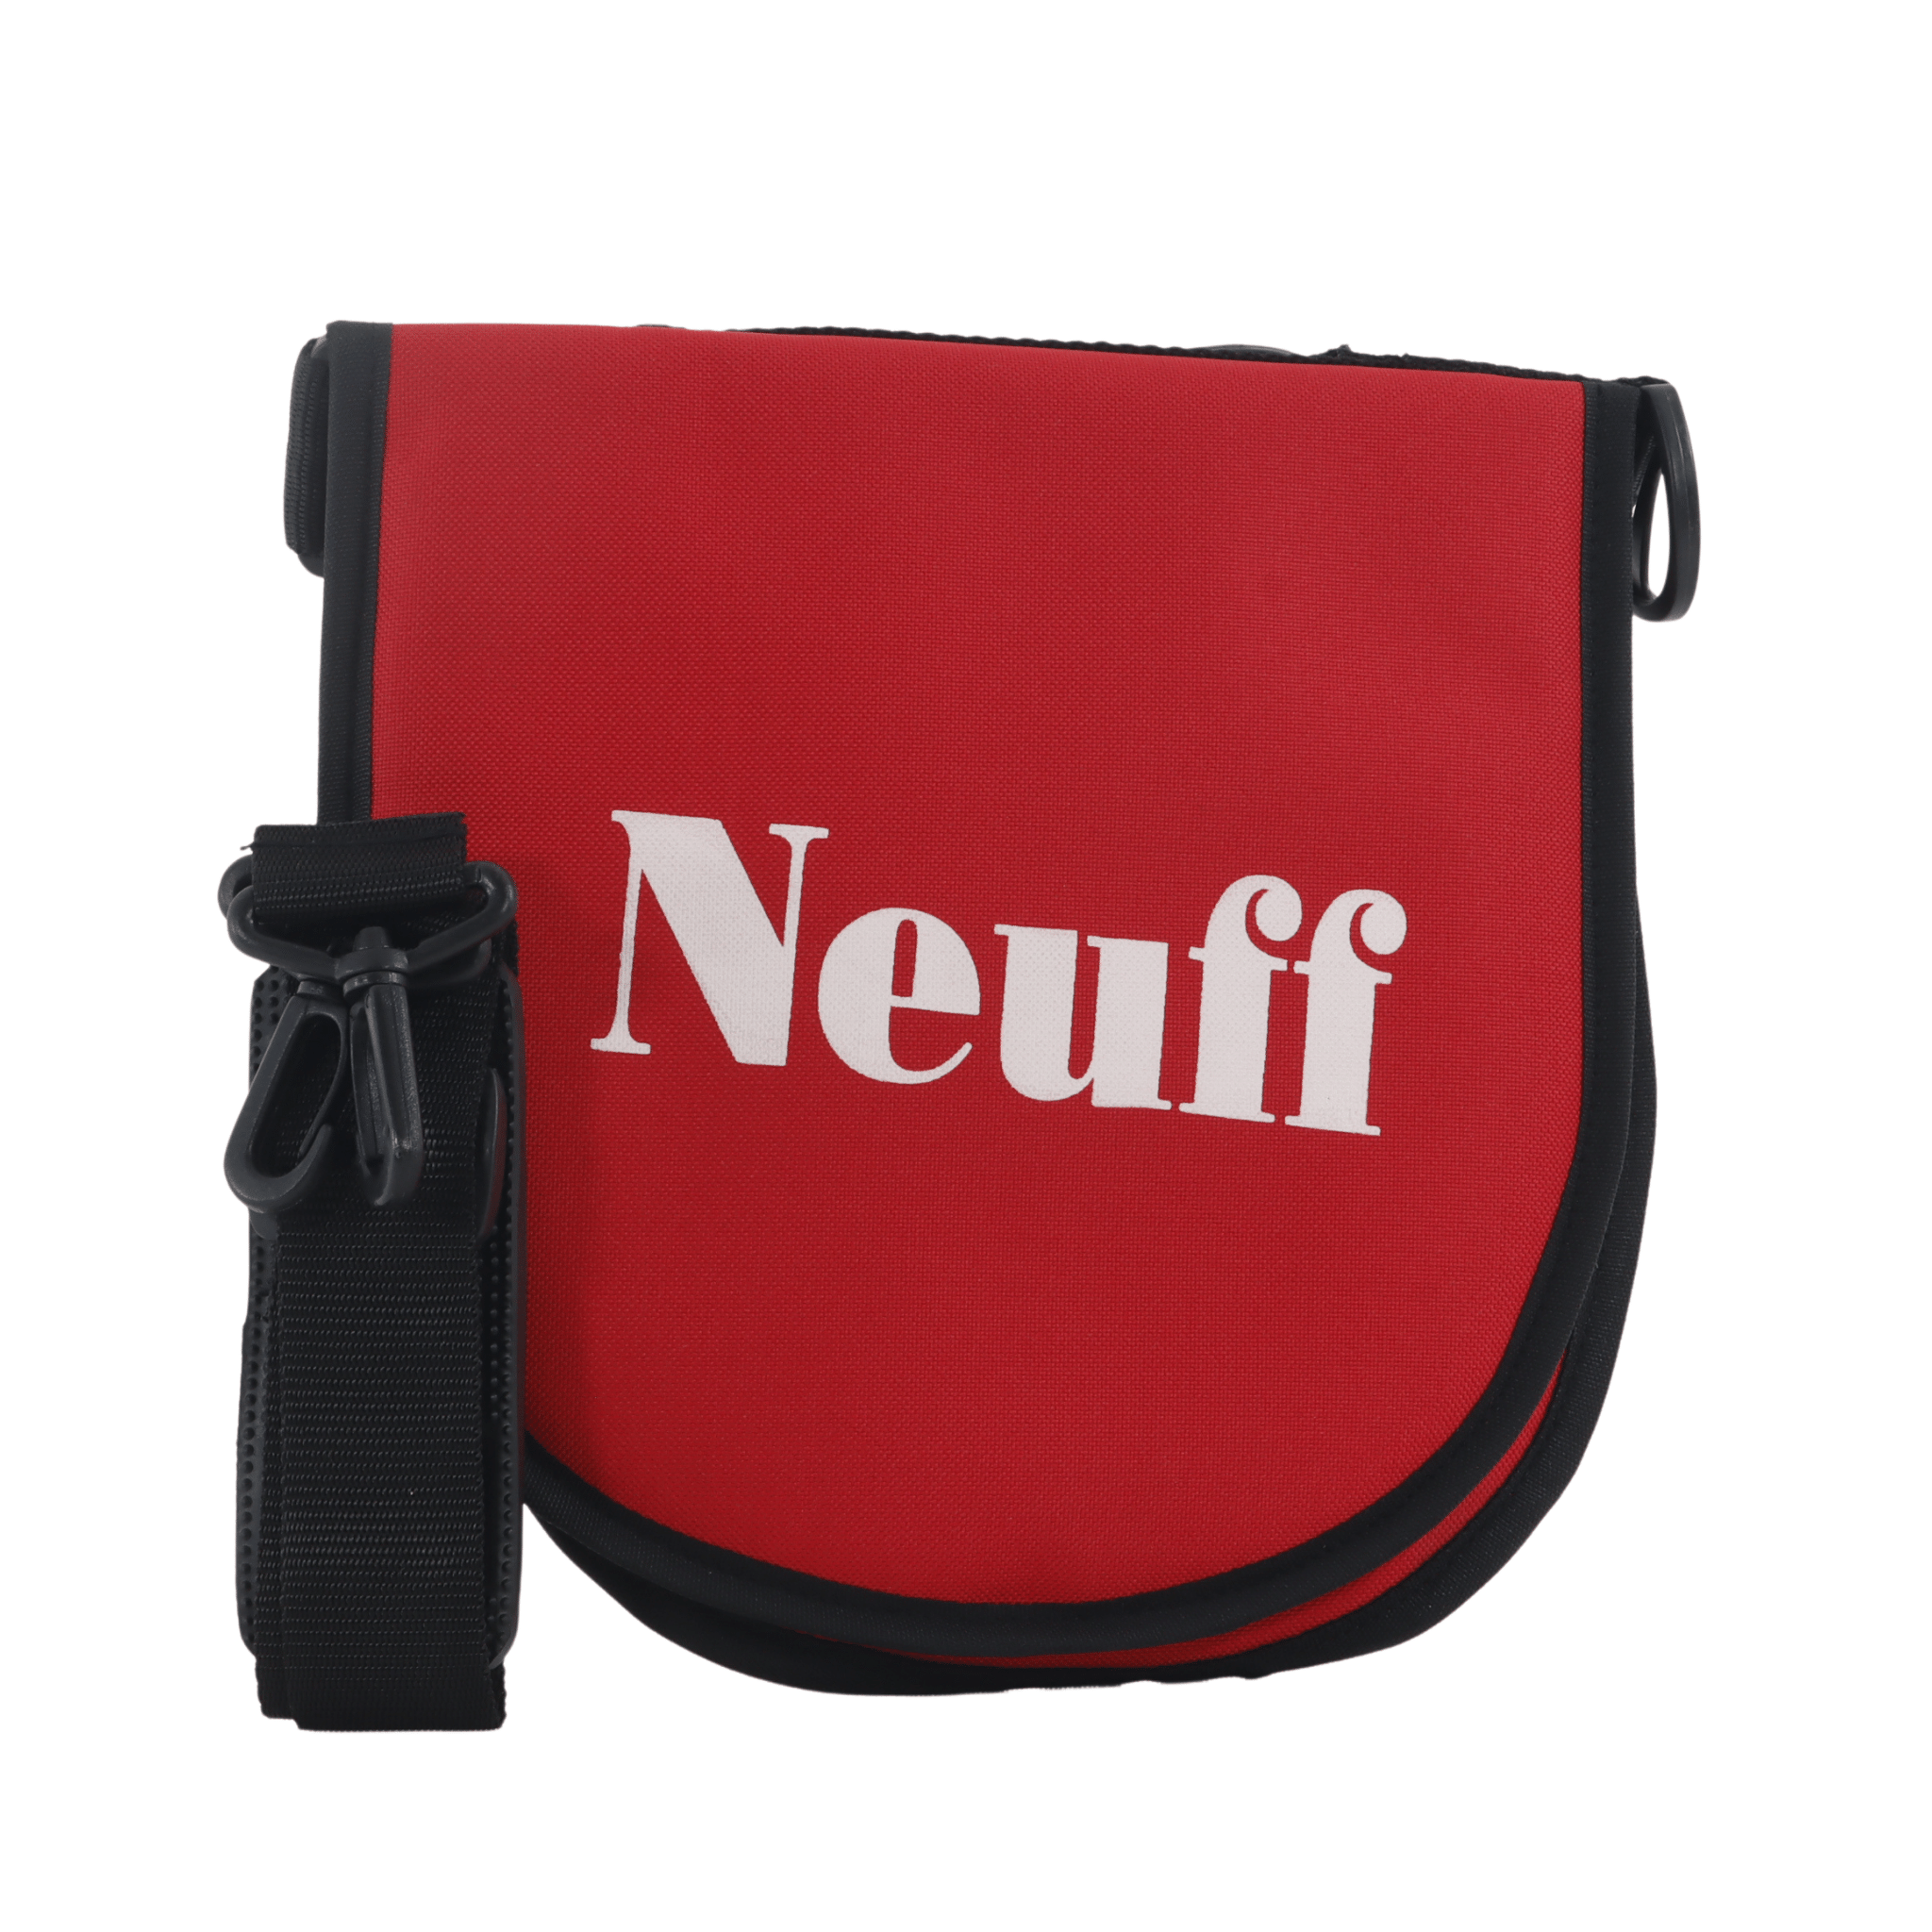 red padded double discus bag to hold two discus